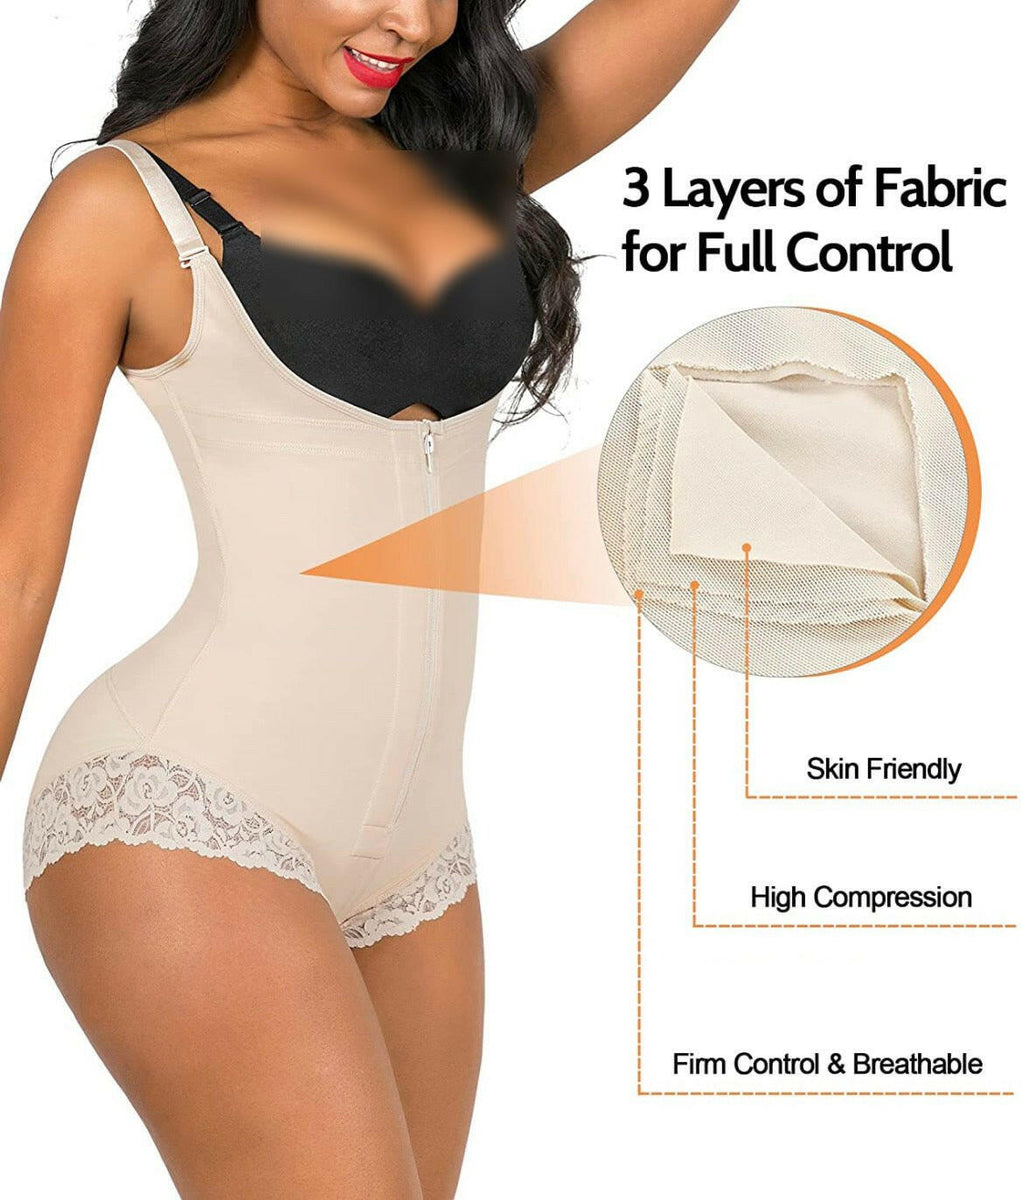 Body Shapers Products Manufacturer, Omtex is a leading body…